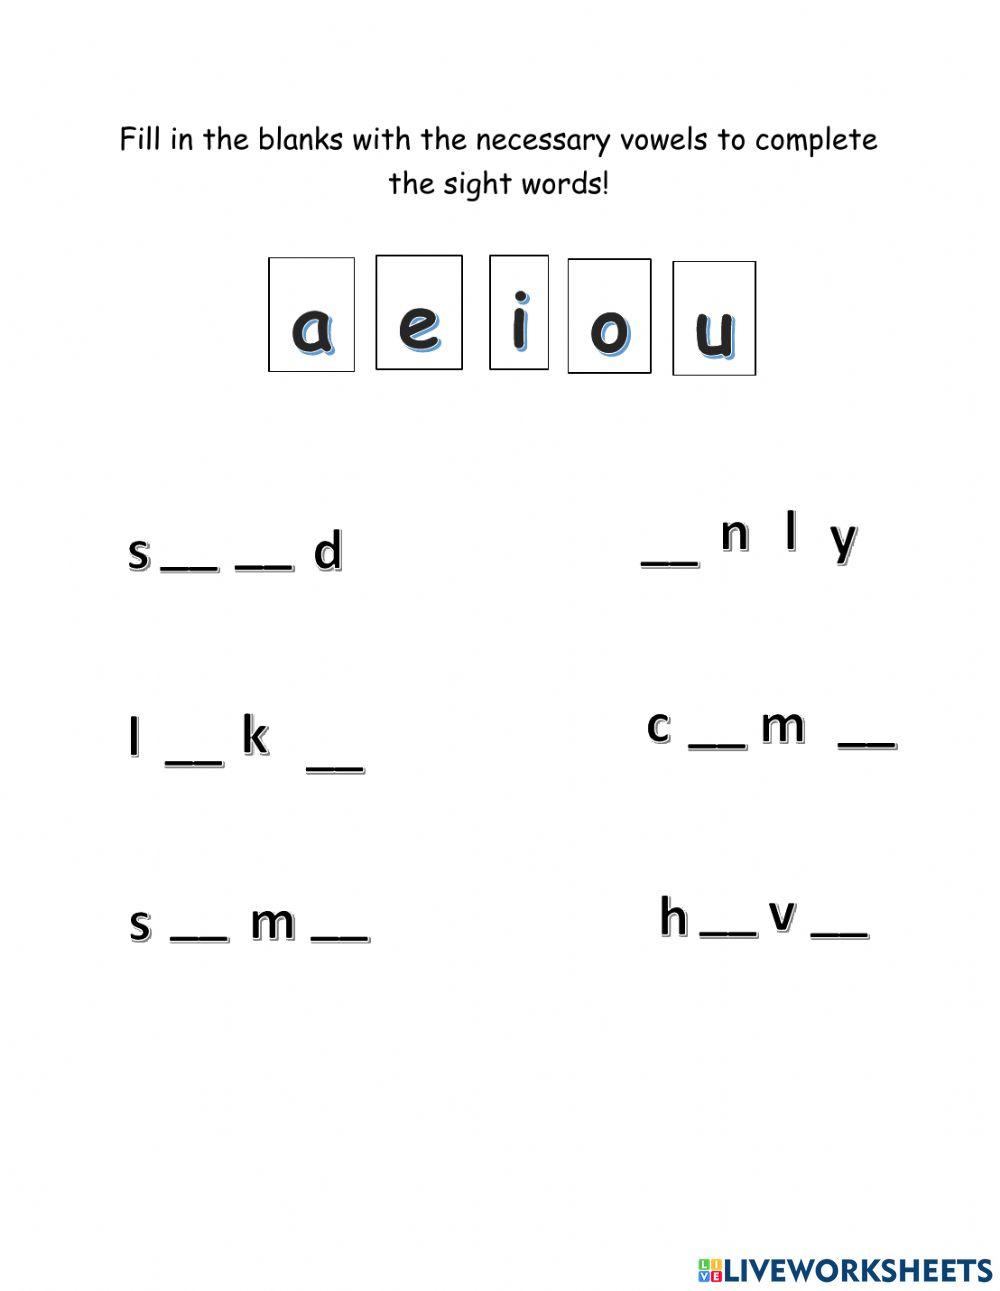 Vowels and Sight Words